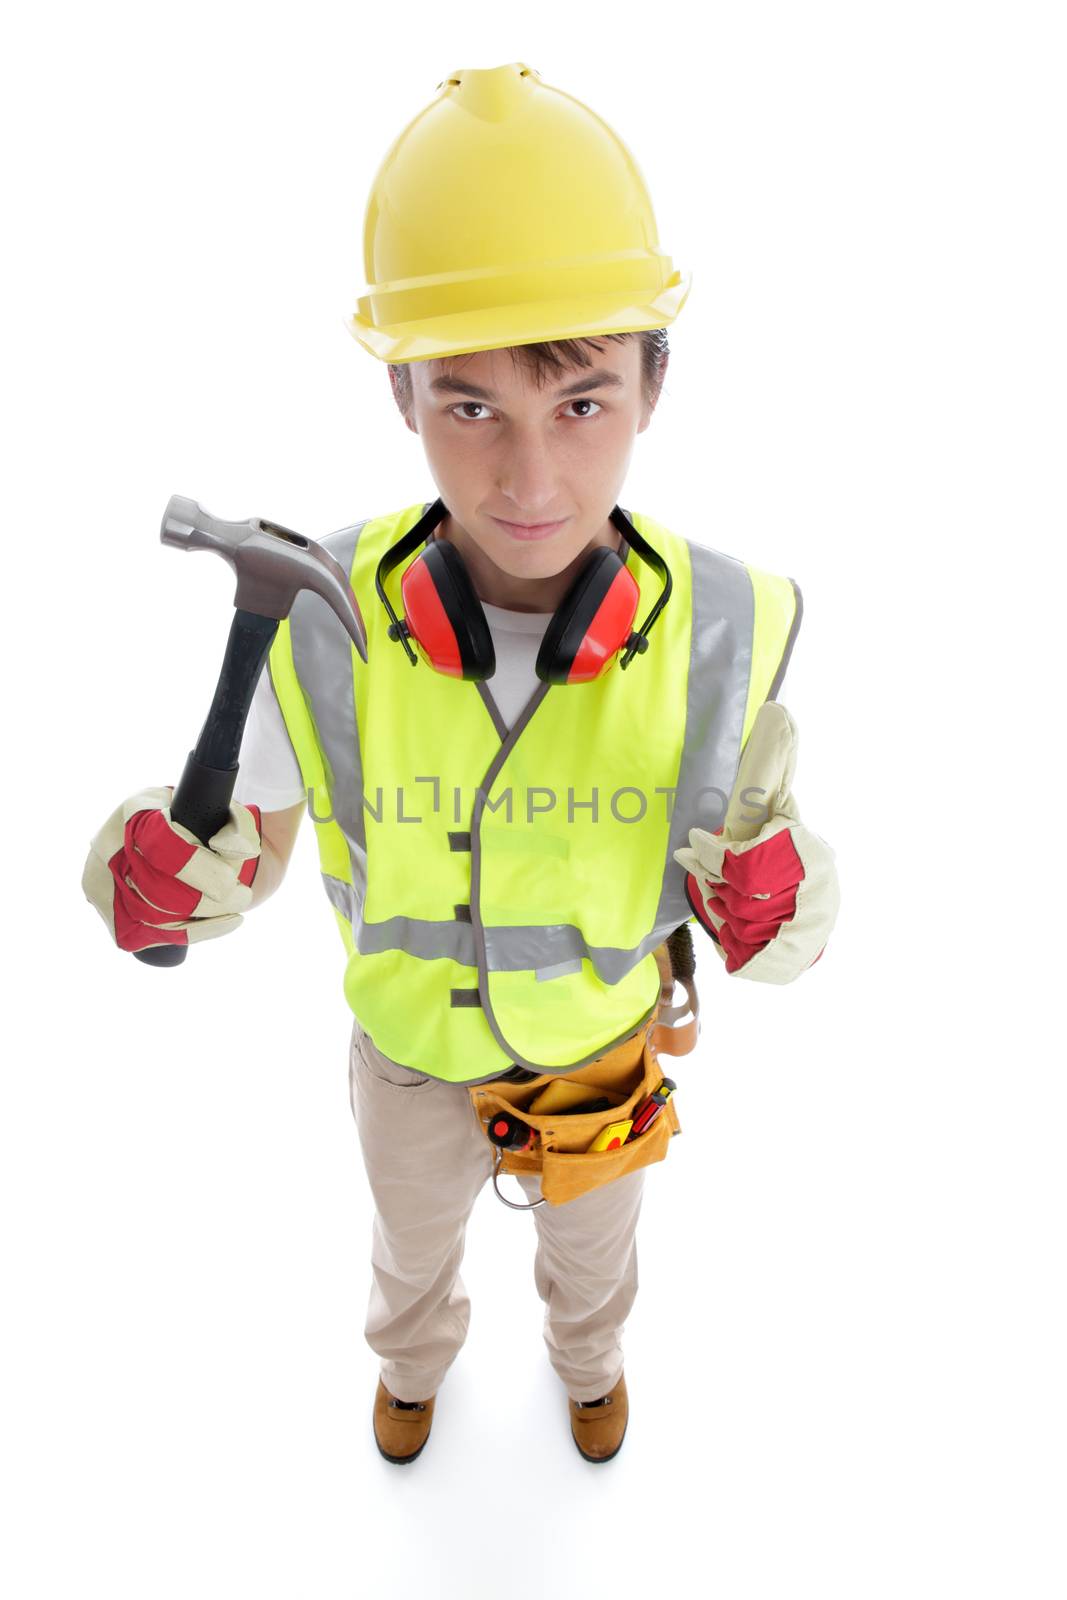 Teenage apprentice builder or technical college tranee student holding a hammer and showing thumbs up approval success sign.  White background.